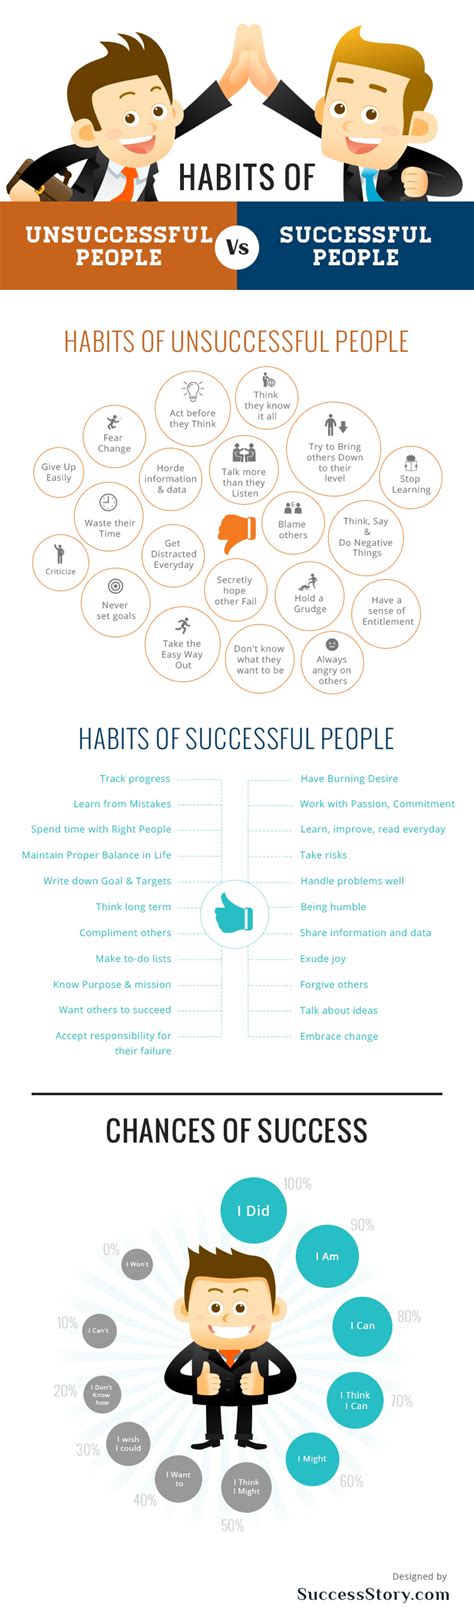 Habits of Successful People Infographic | Self Help Daily